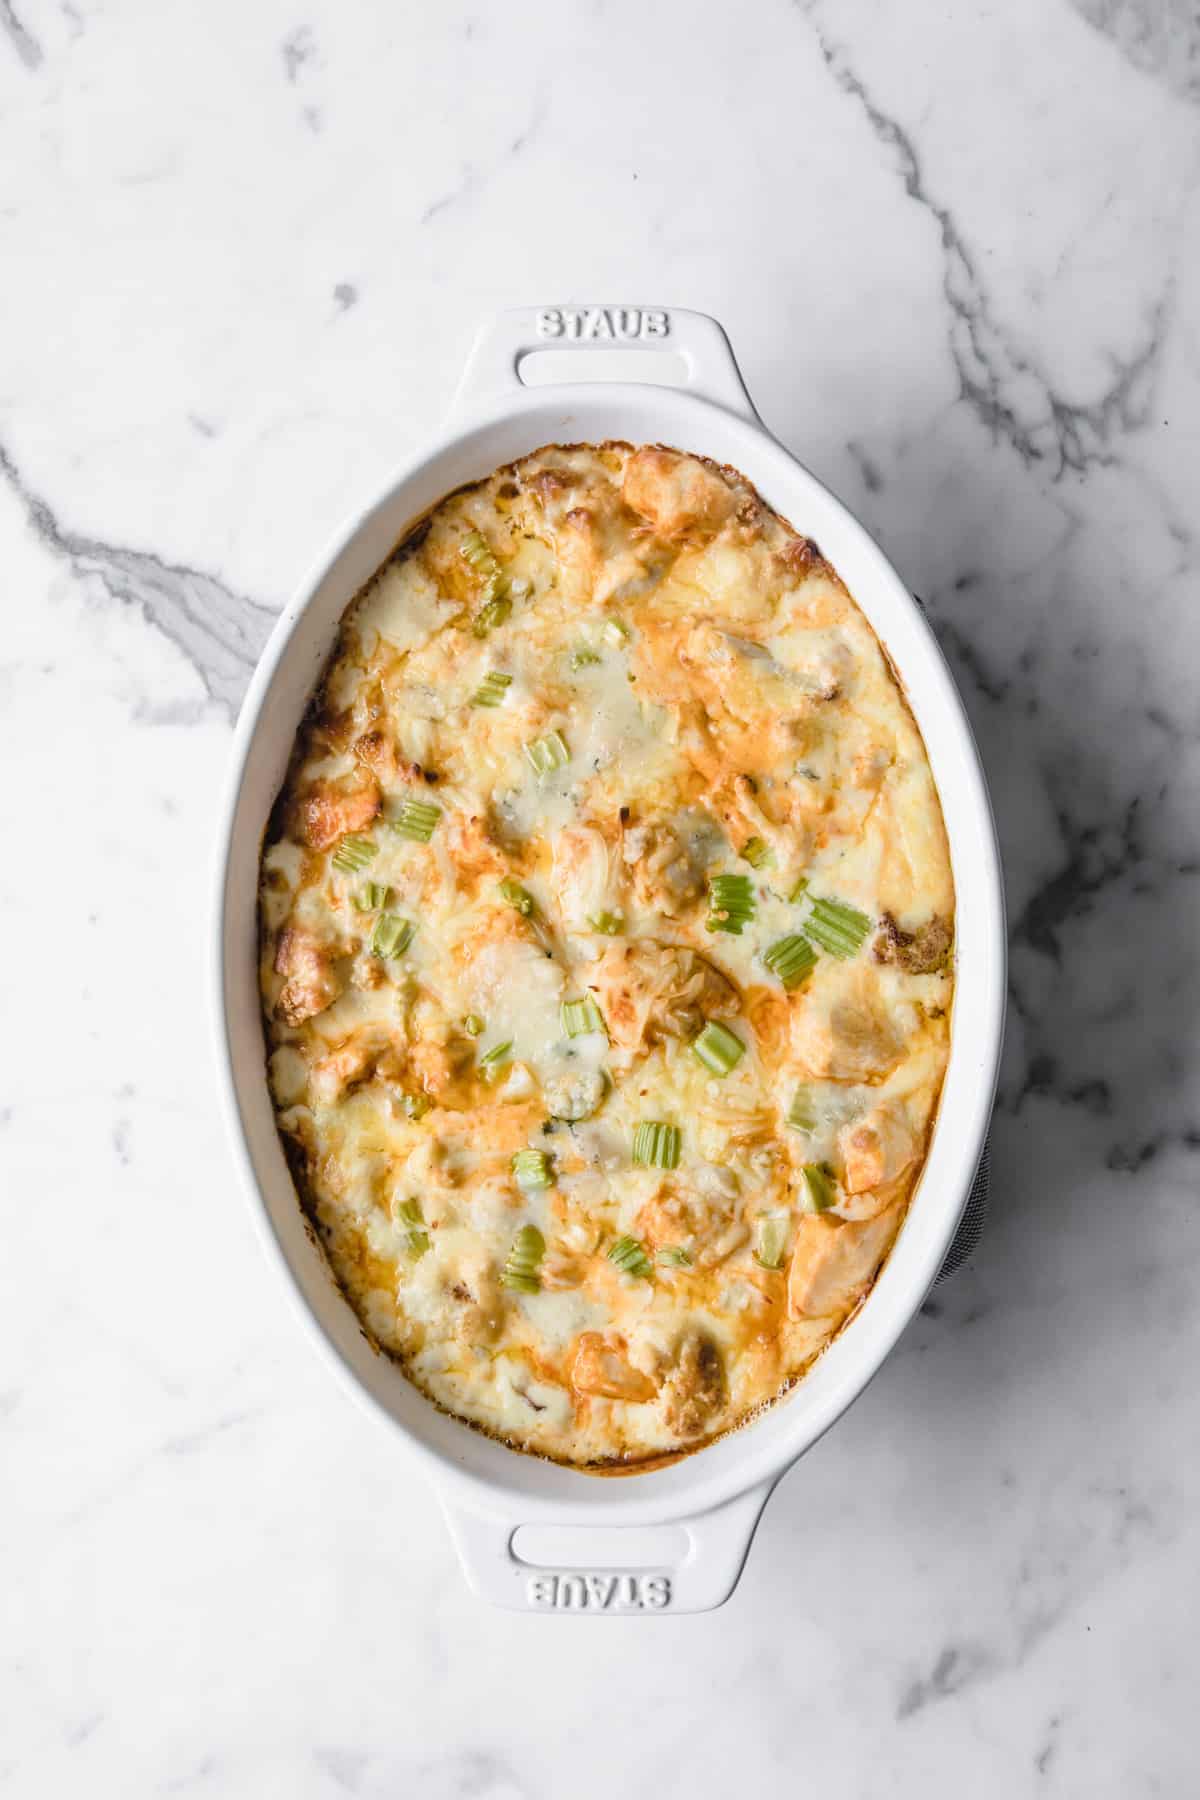 white casserole dish with low carb buffalo chicken Mac and cheese